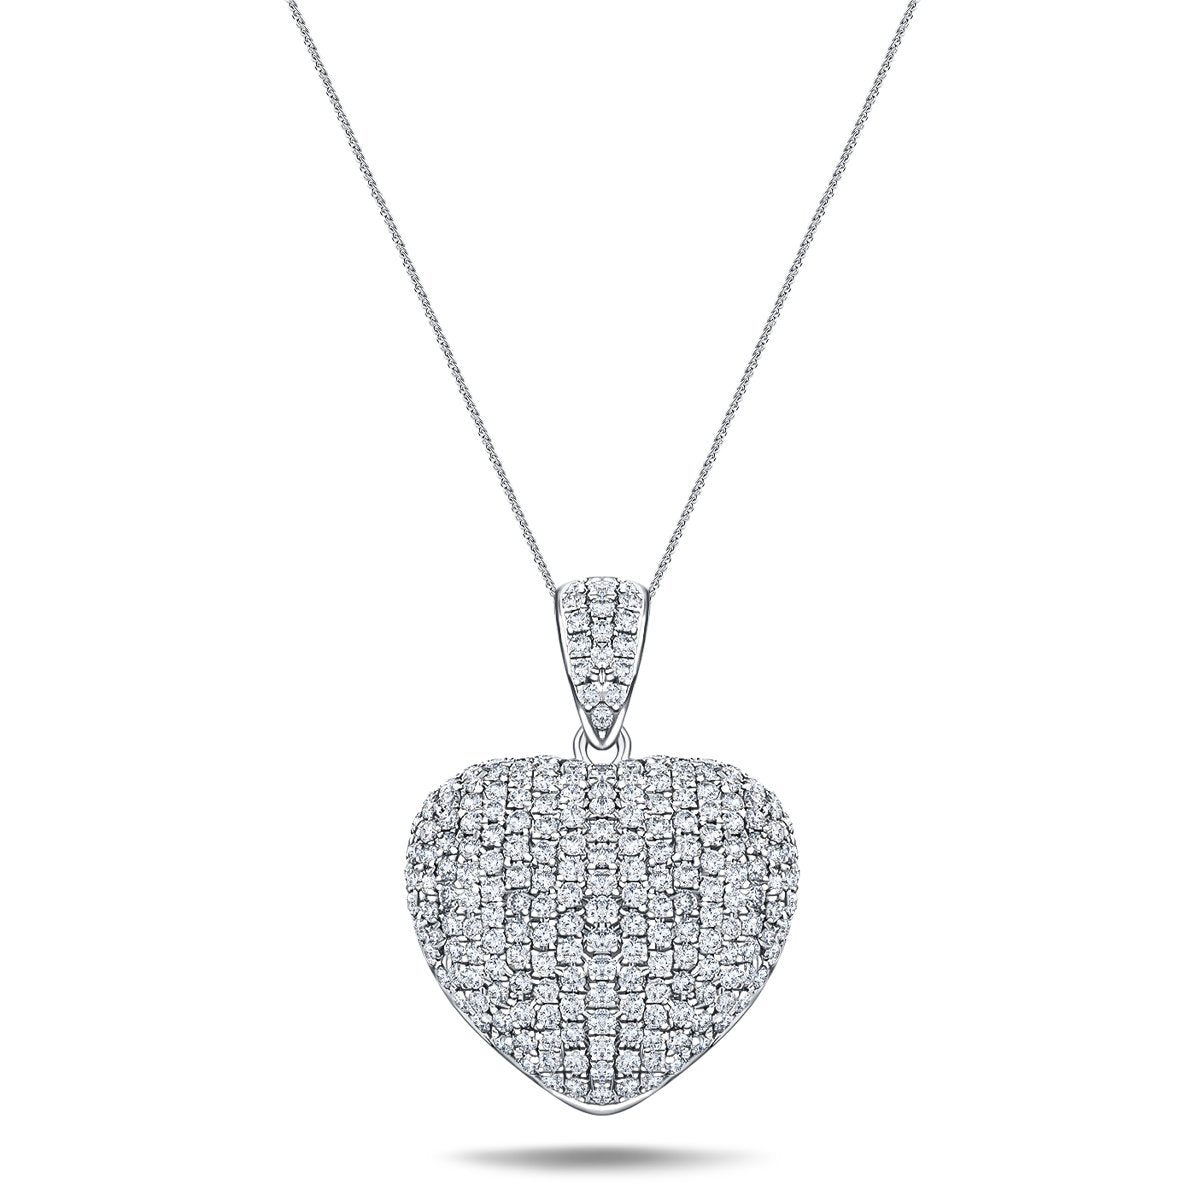 Diamond Heart Pendant Necklace 3.30ct G/SI Quality 18k in White Gold - All Diamond